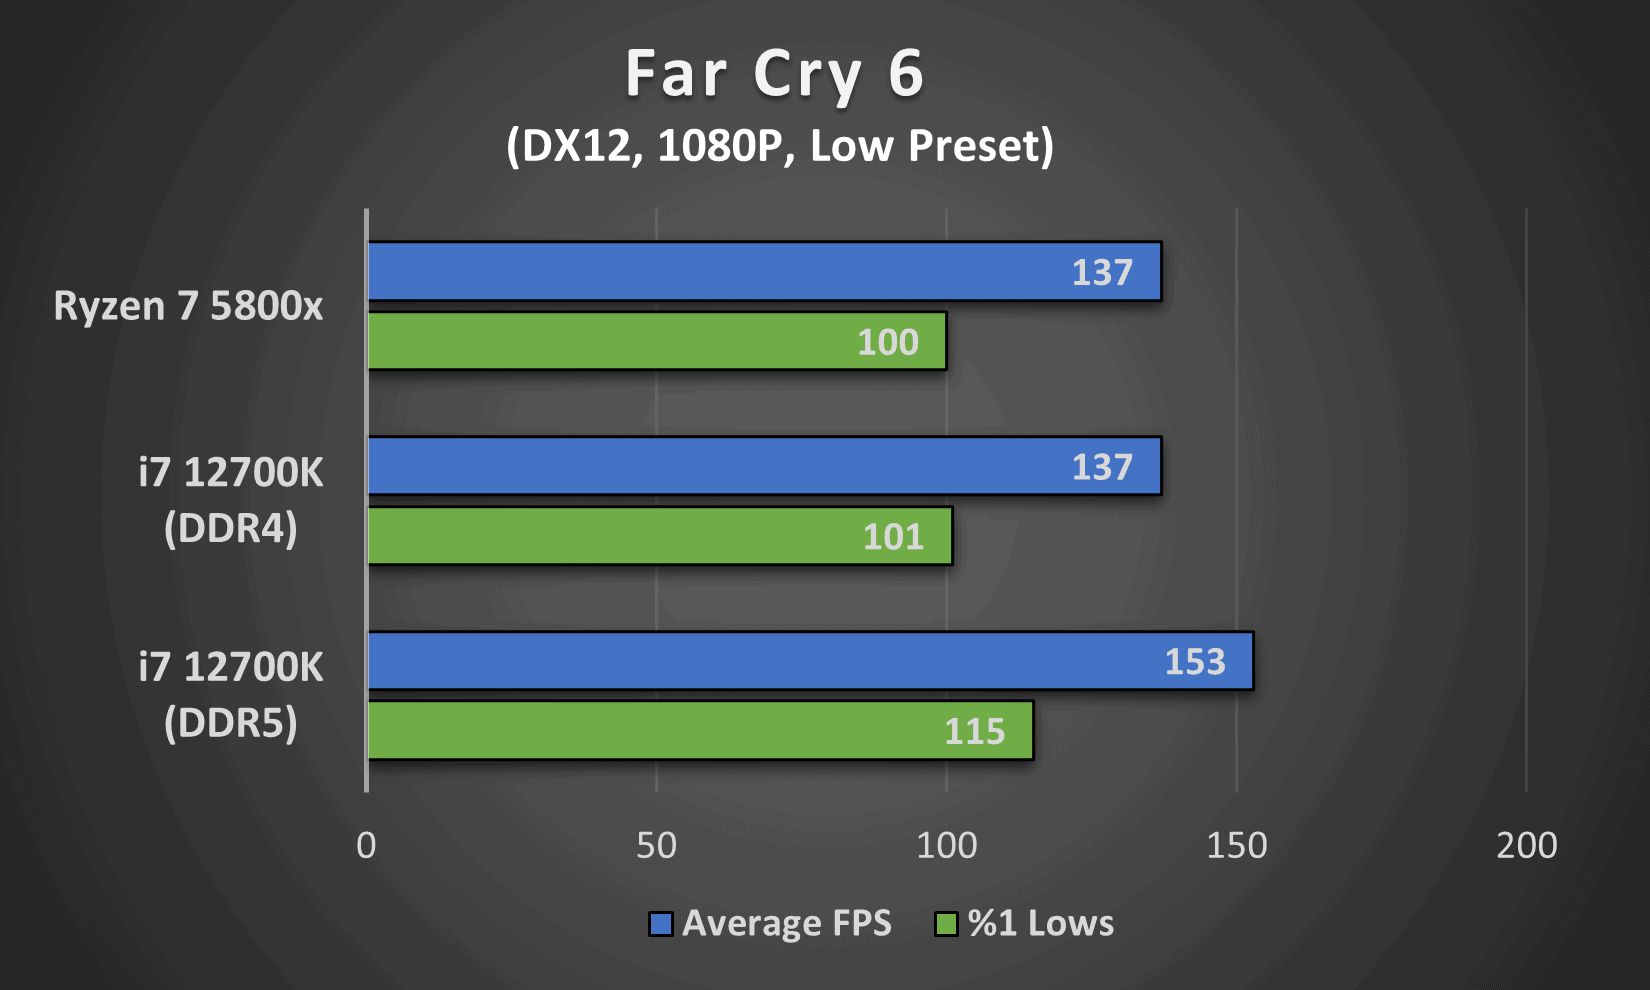 Far Cry 6 performance comparison between Intel's i7 12700K (DDR4 and DDR5) and AMD's Ryzen 7 5800x